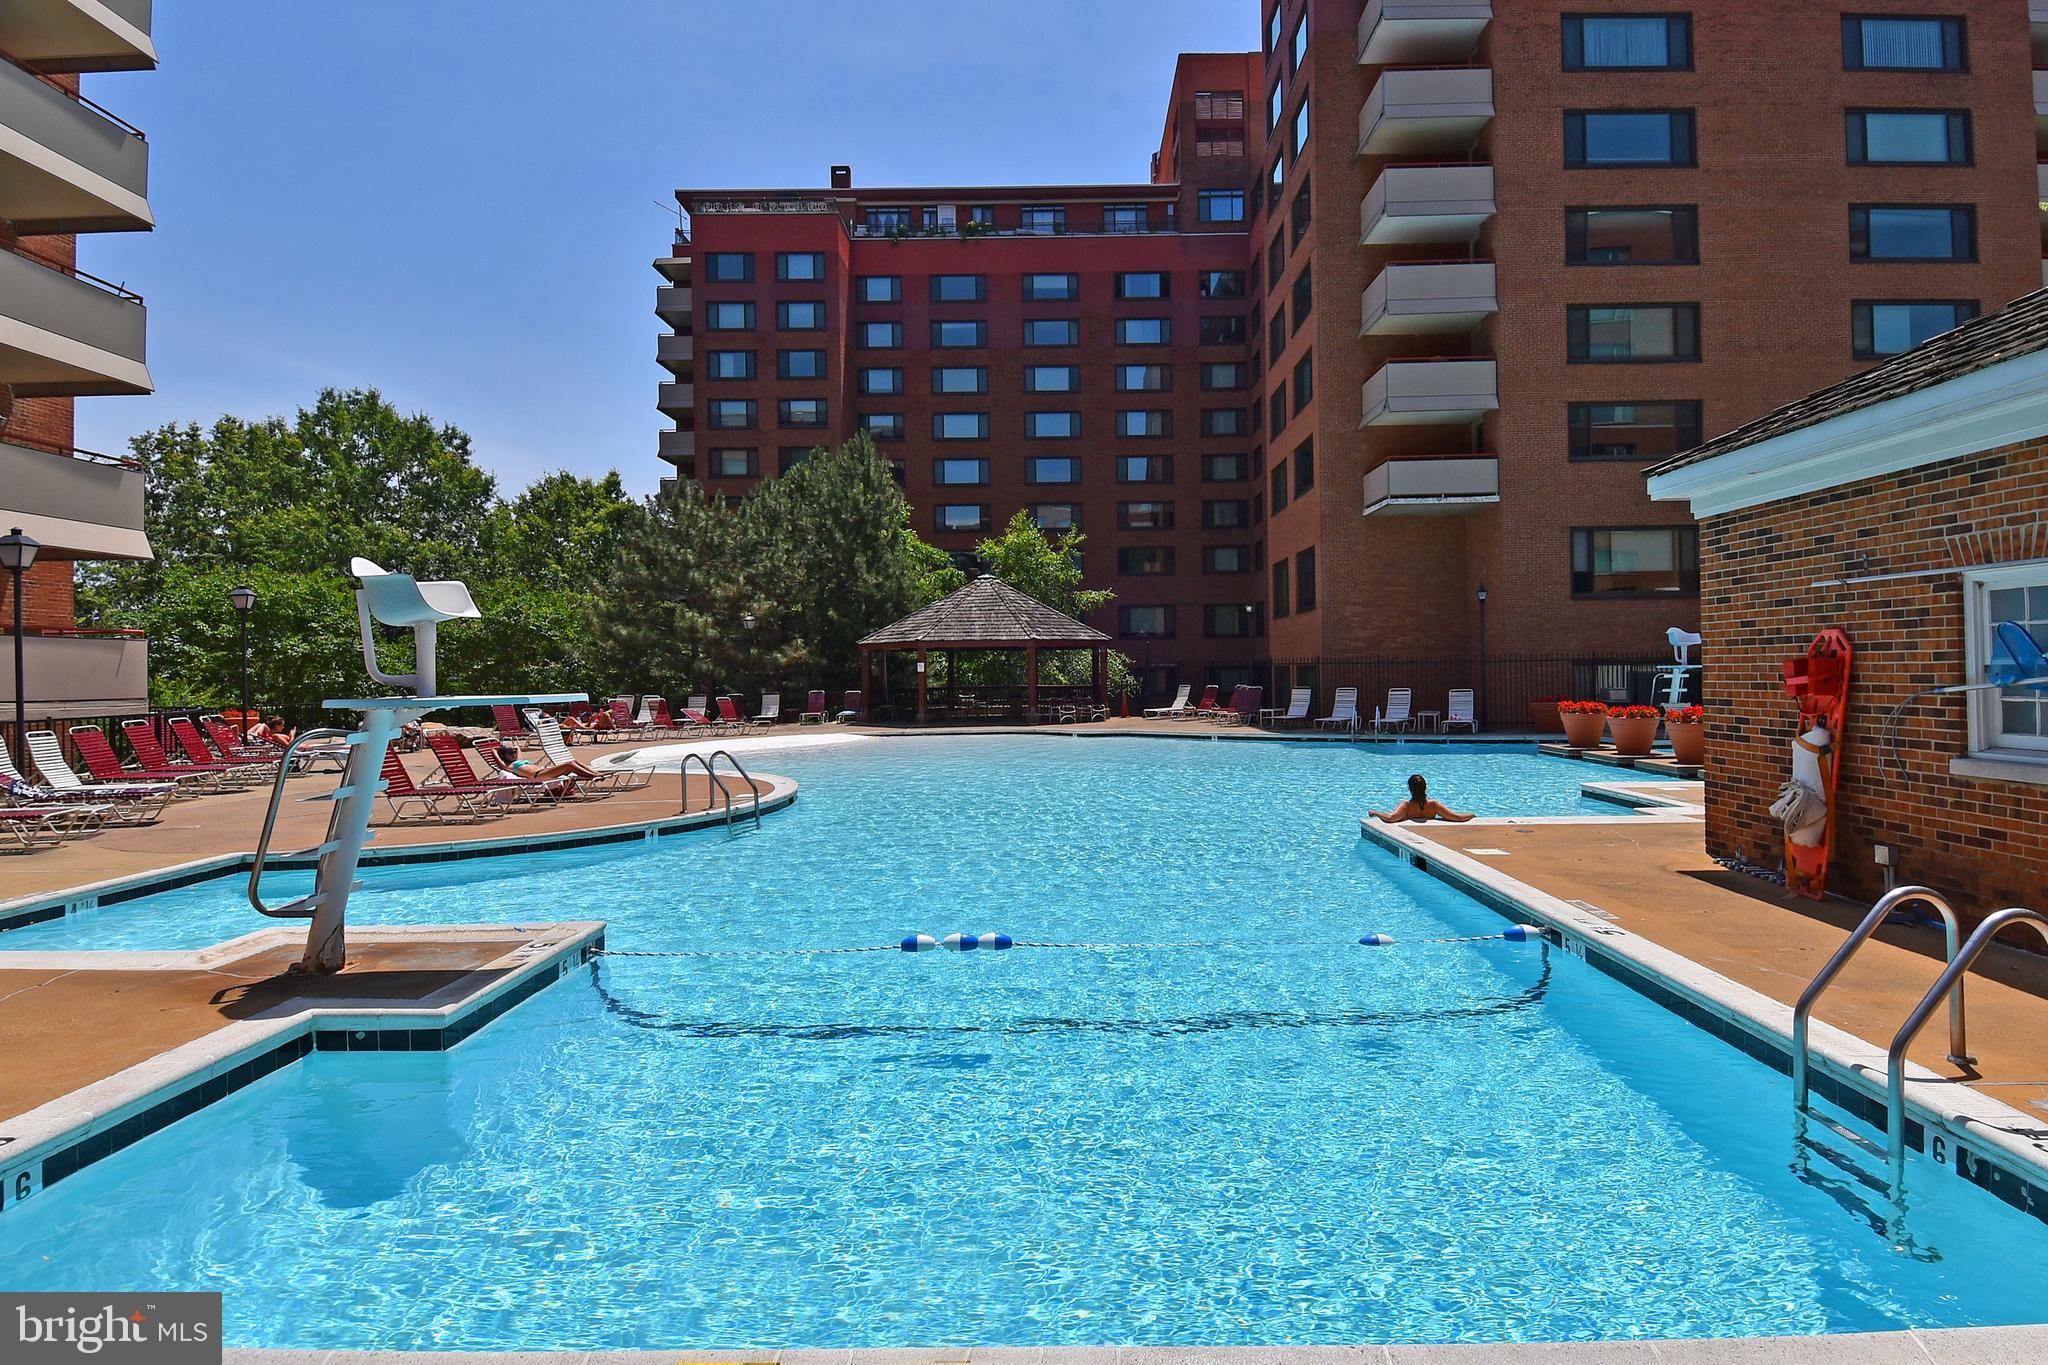 a view of a swimming pool with a lounge chairs